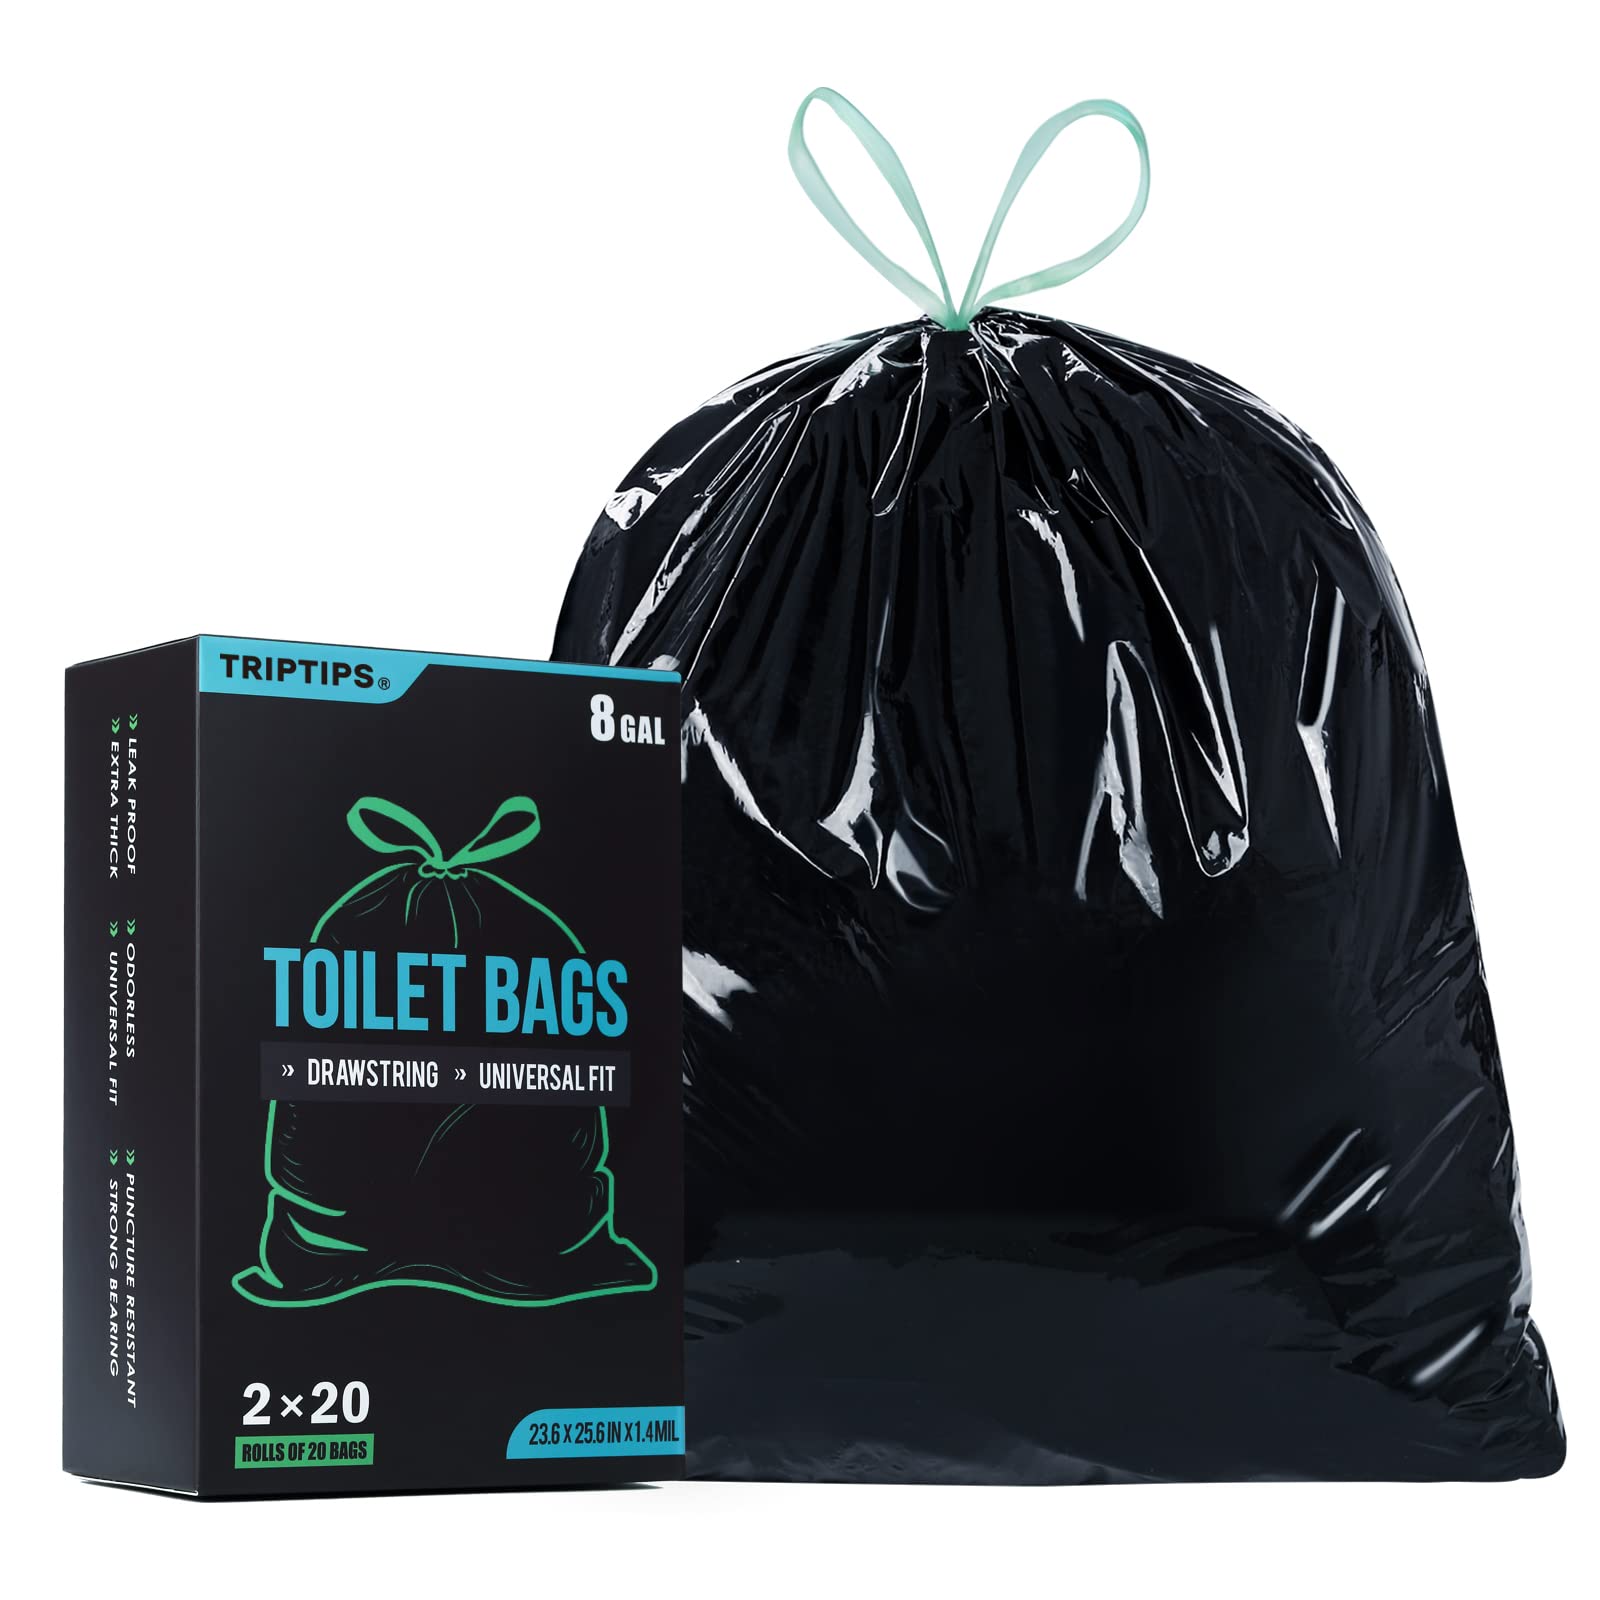 TRIPTIPS Portable Toilet Bags 40 Count Drawstring 8 Gallon Camping Toilet Bags Leak-Proof Toilet Liners for Camping, Hiking, Traveling